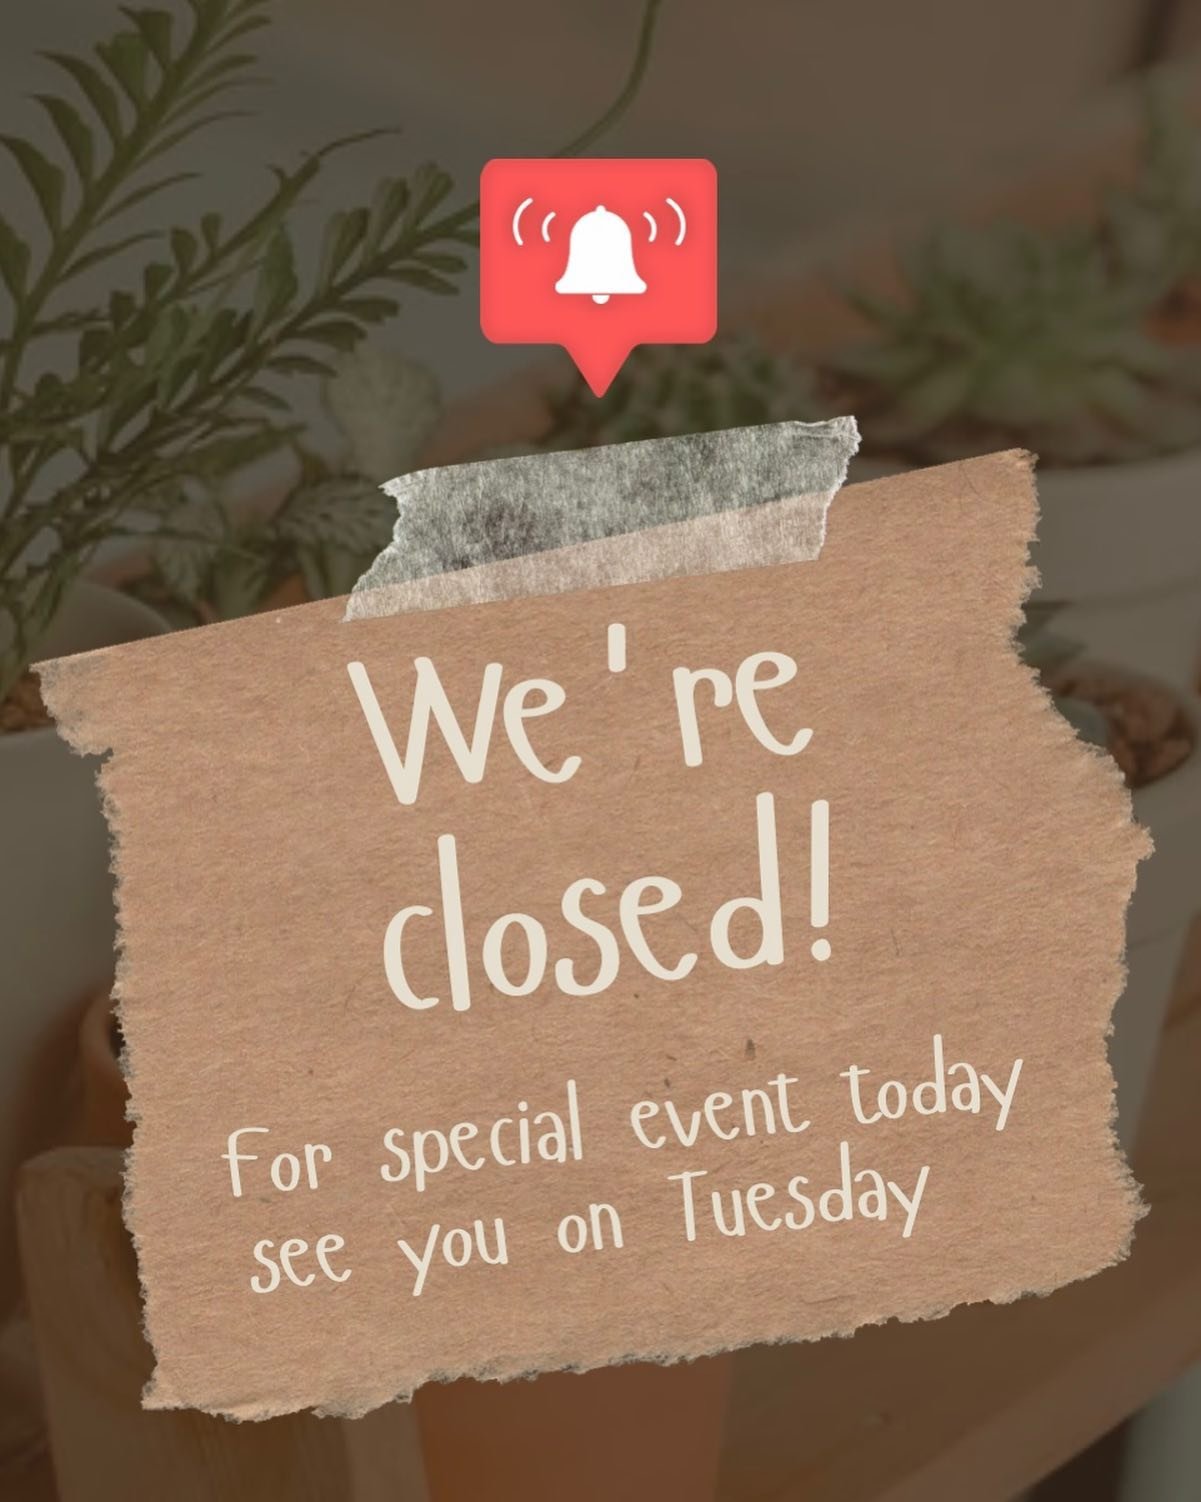 Hello Chambana, our store will closed on May 20th for special event, and resume regular business hour on Tue from 8am to 6pm! Thank you for your understanding and see you all on Tuesday! 💗🥐☕️